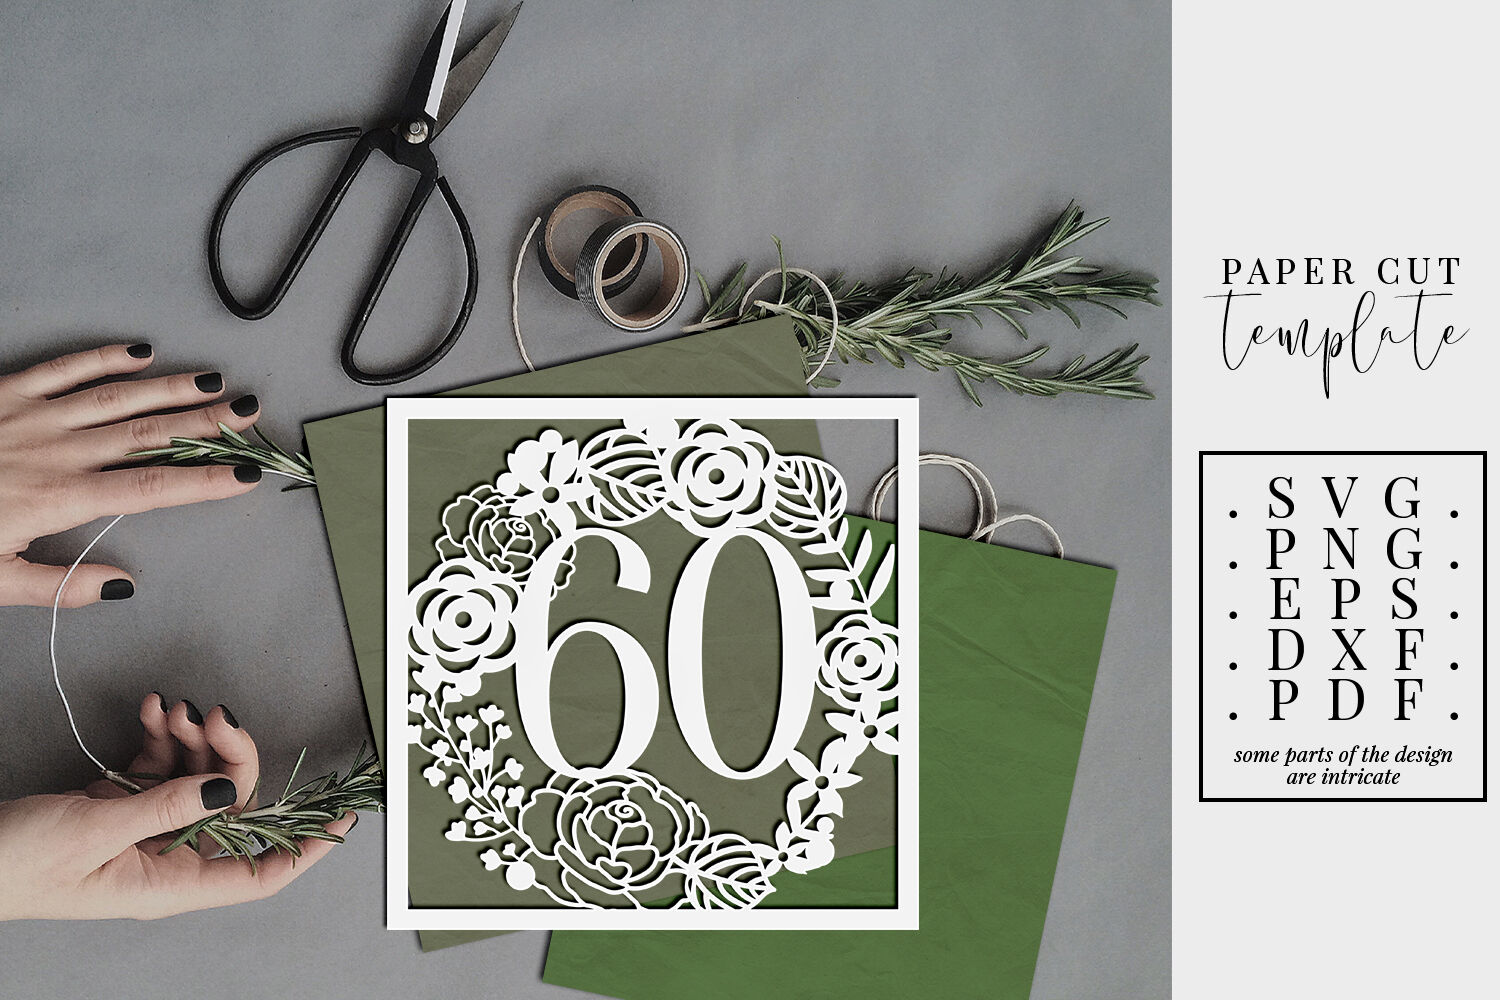 Download 60 Birthday Square Papercut Template, 60th Birthday SVG ...